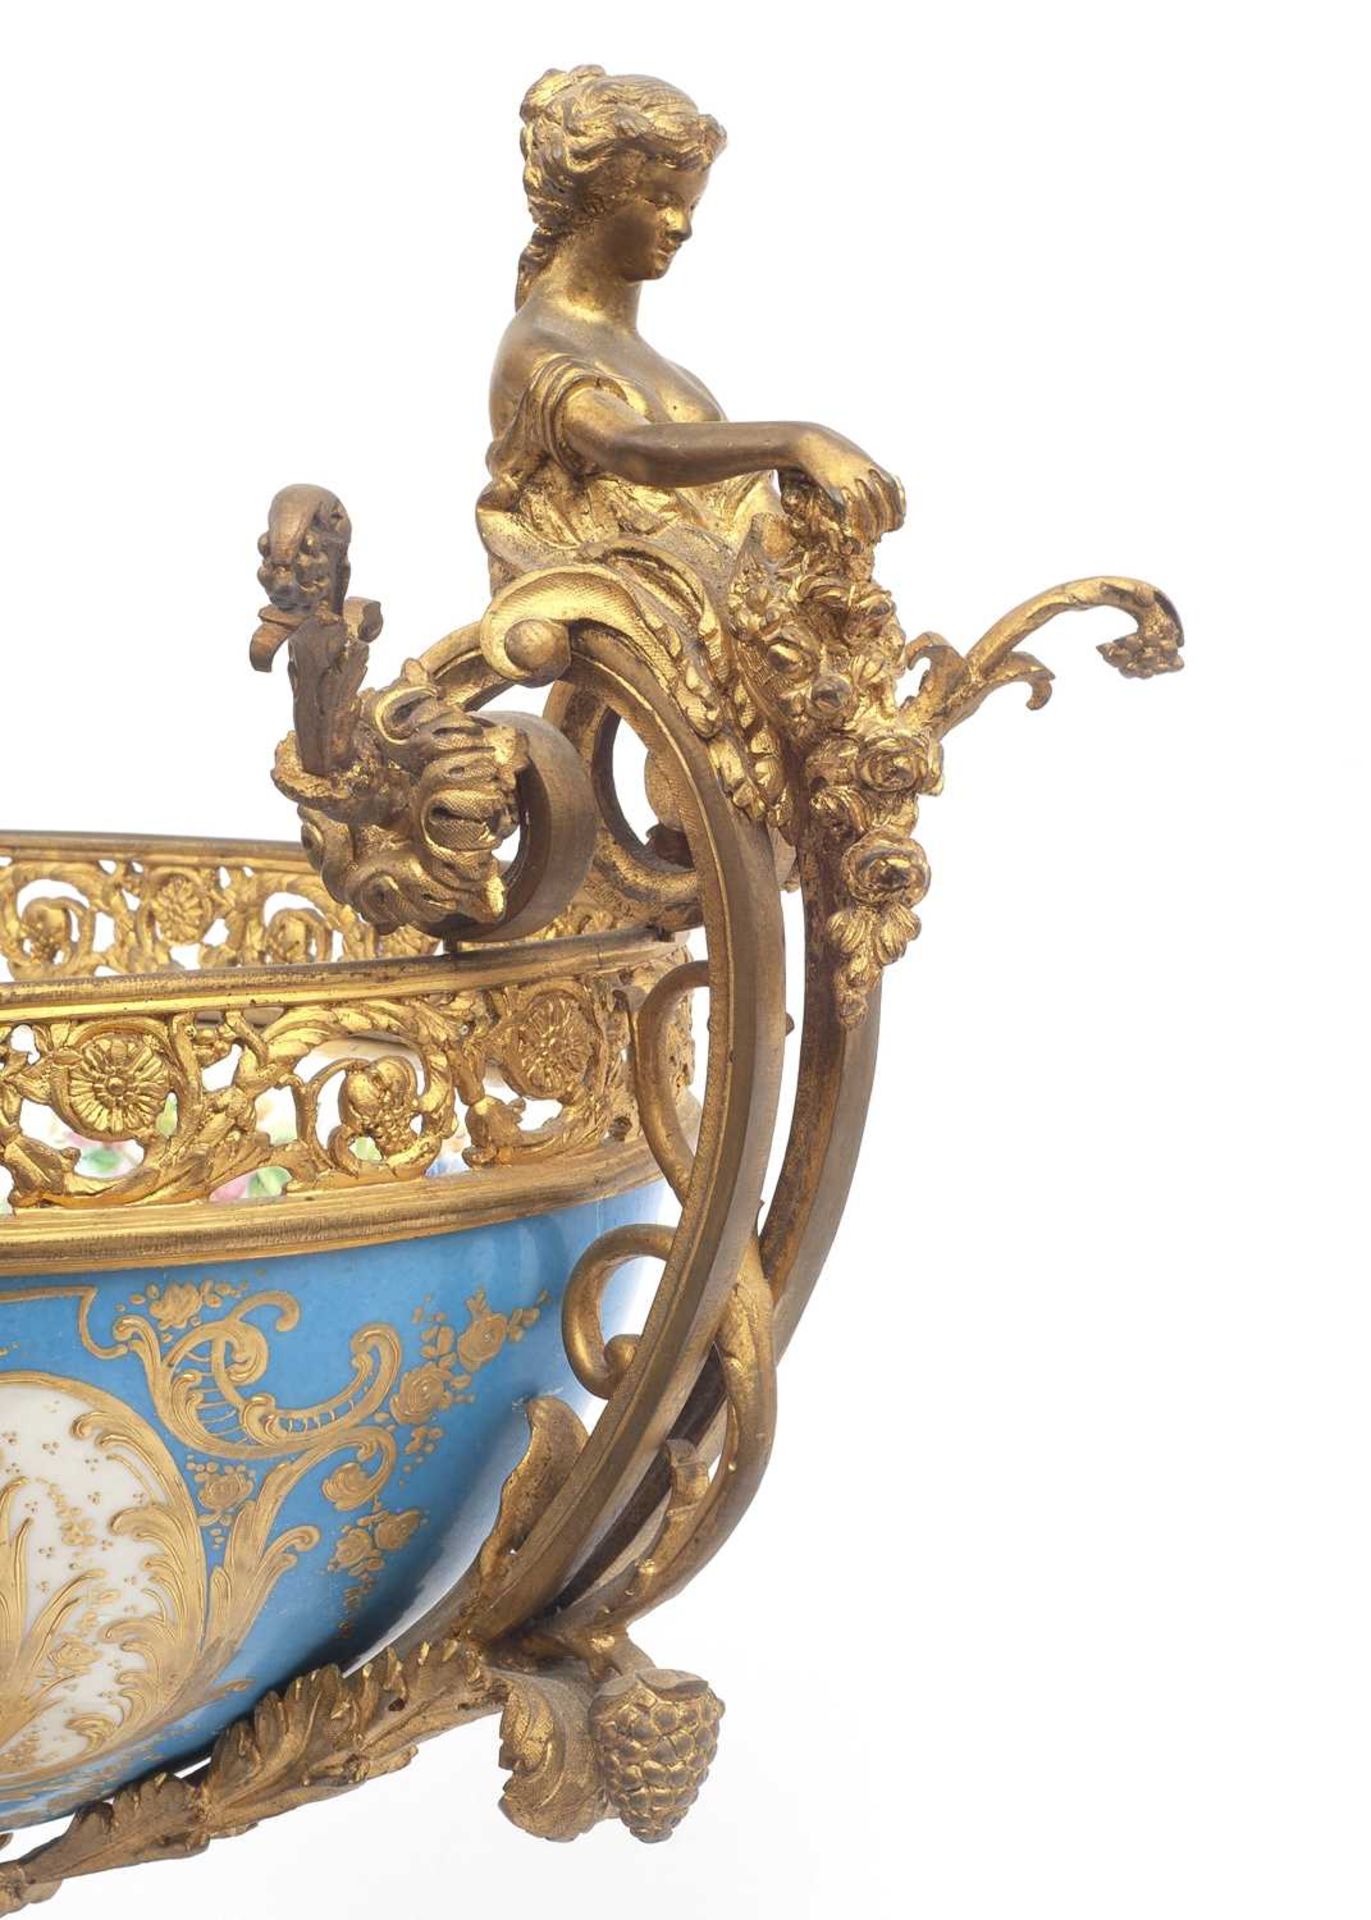 A VERY LARGE LATE 19TH CENTURY FRENCH SEVRES STYLE PORCELAIN AND ORMOLU MOUNTED JARDINIERE - Image 4 of 4